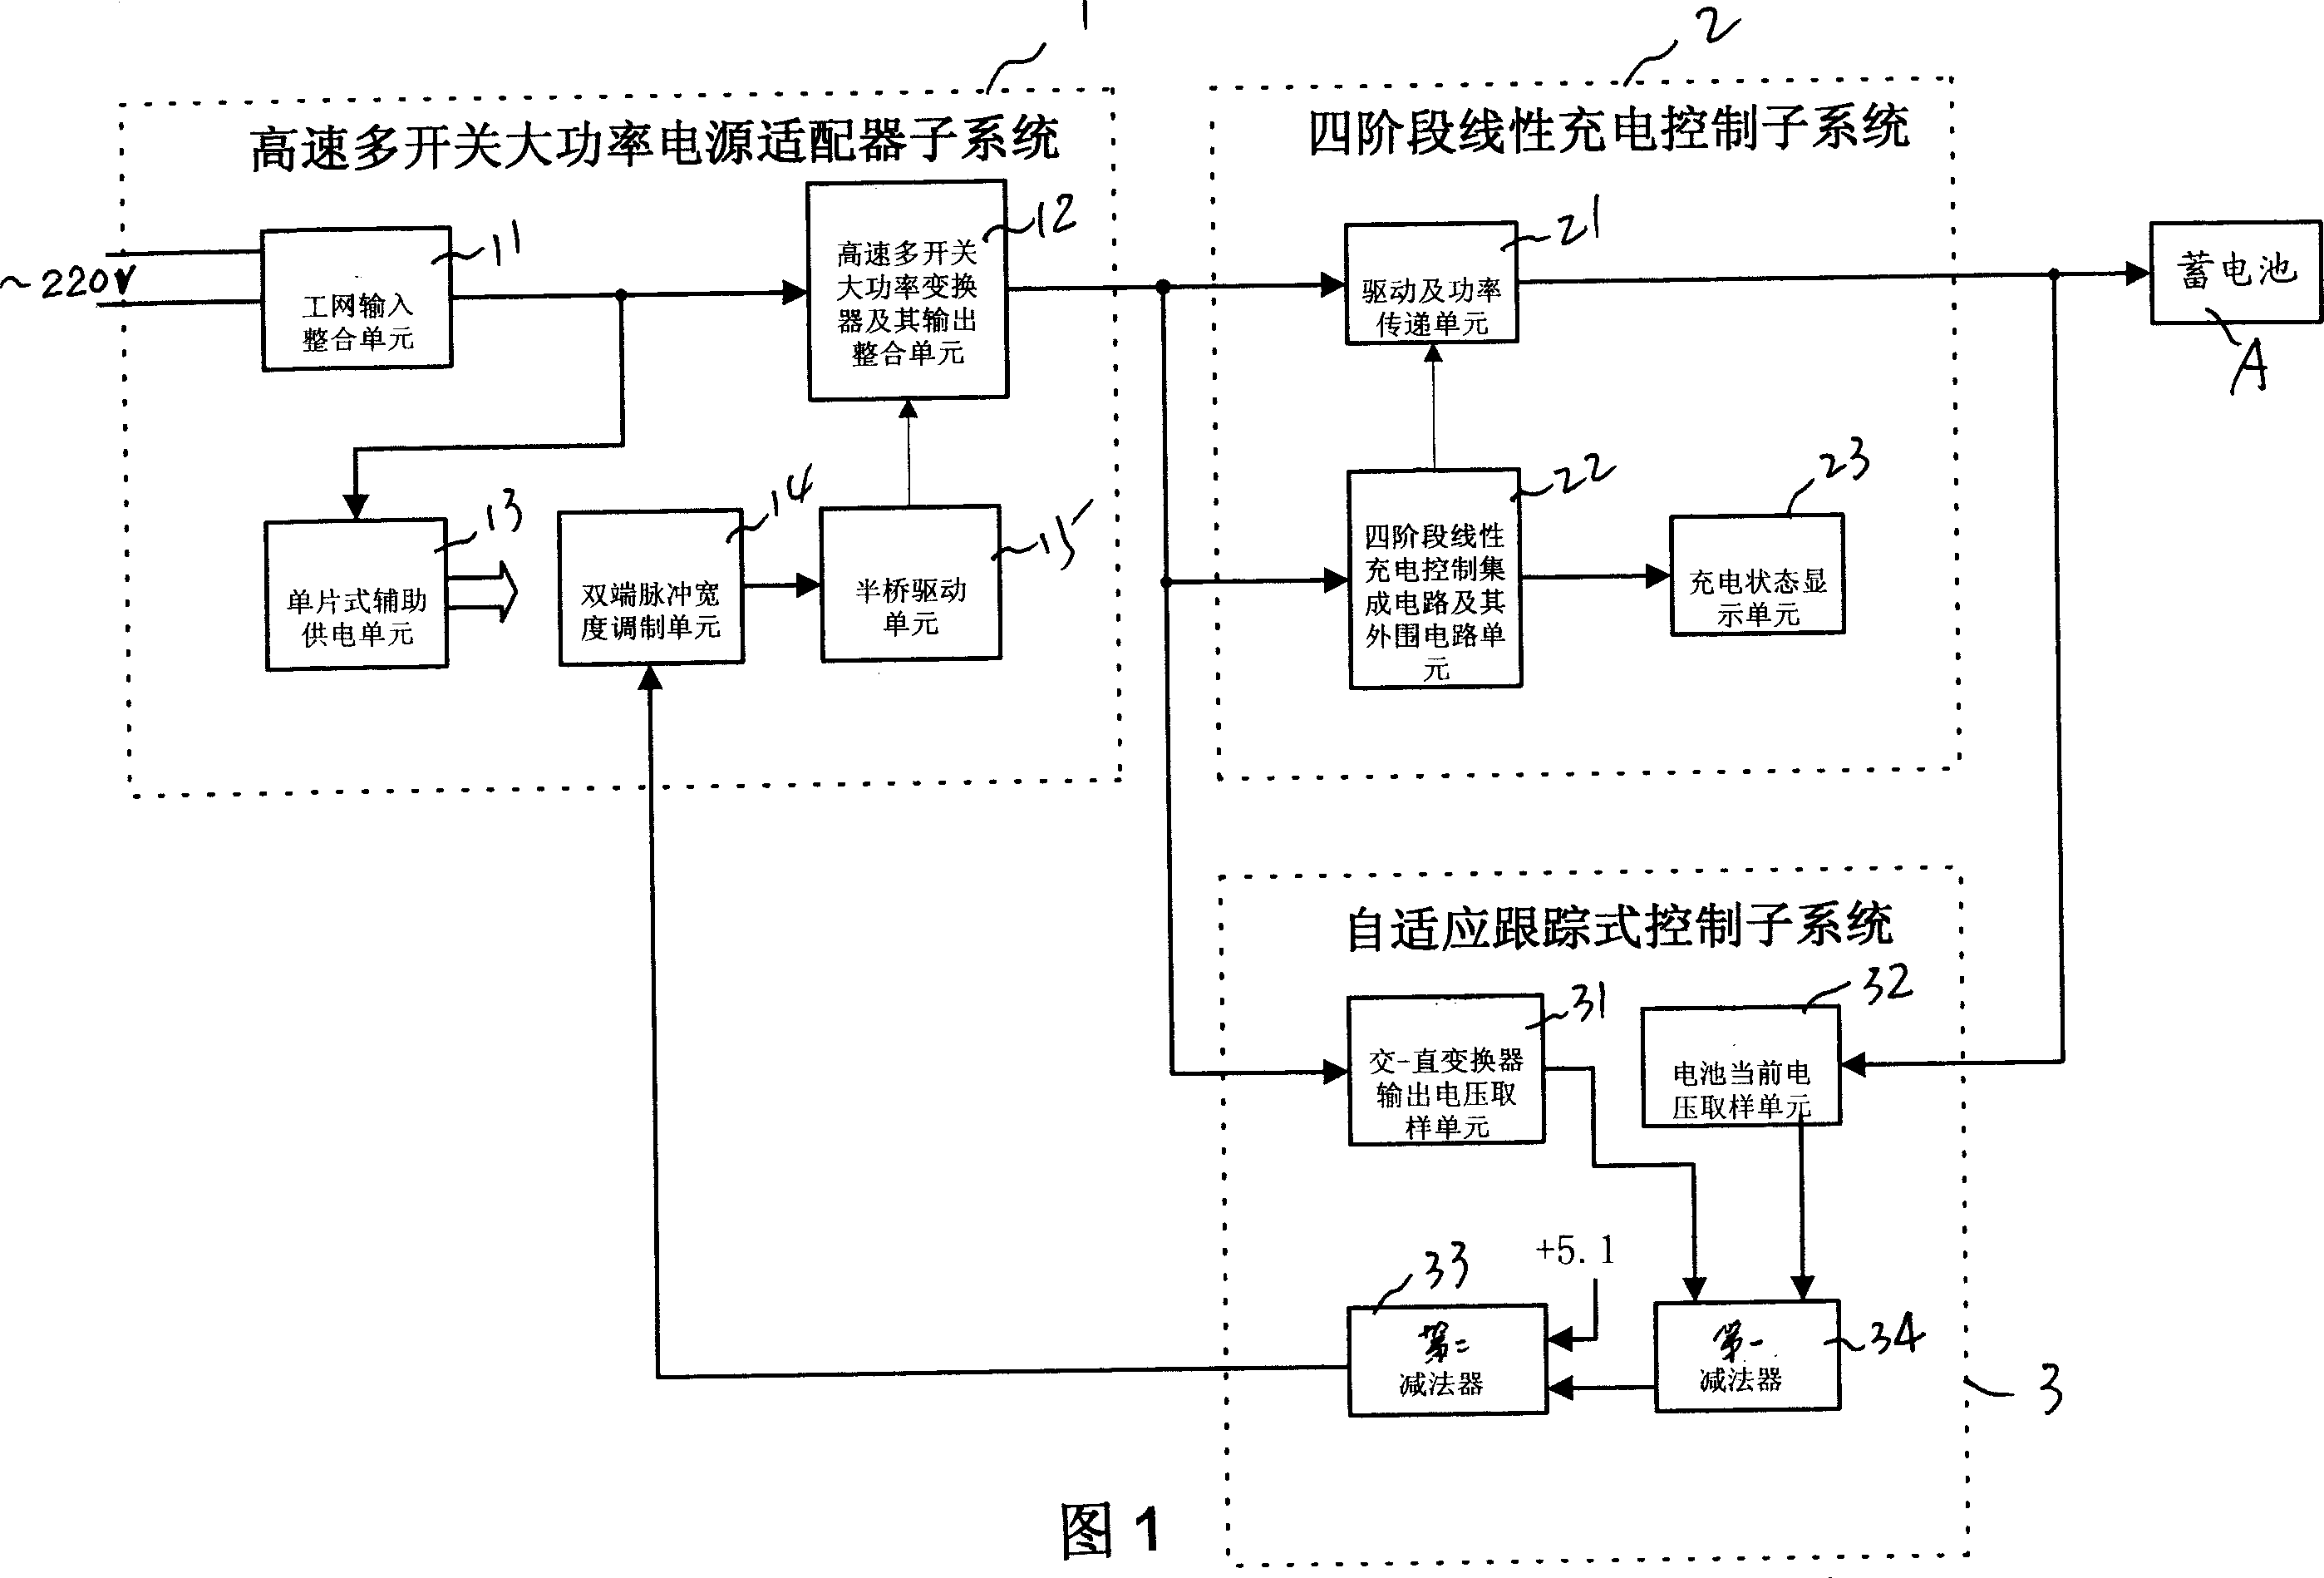 High-speed multi-stage charging system and method for self-adaptive tractive dynamic battery